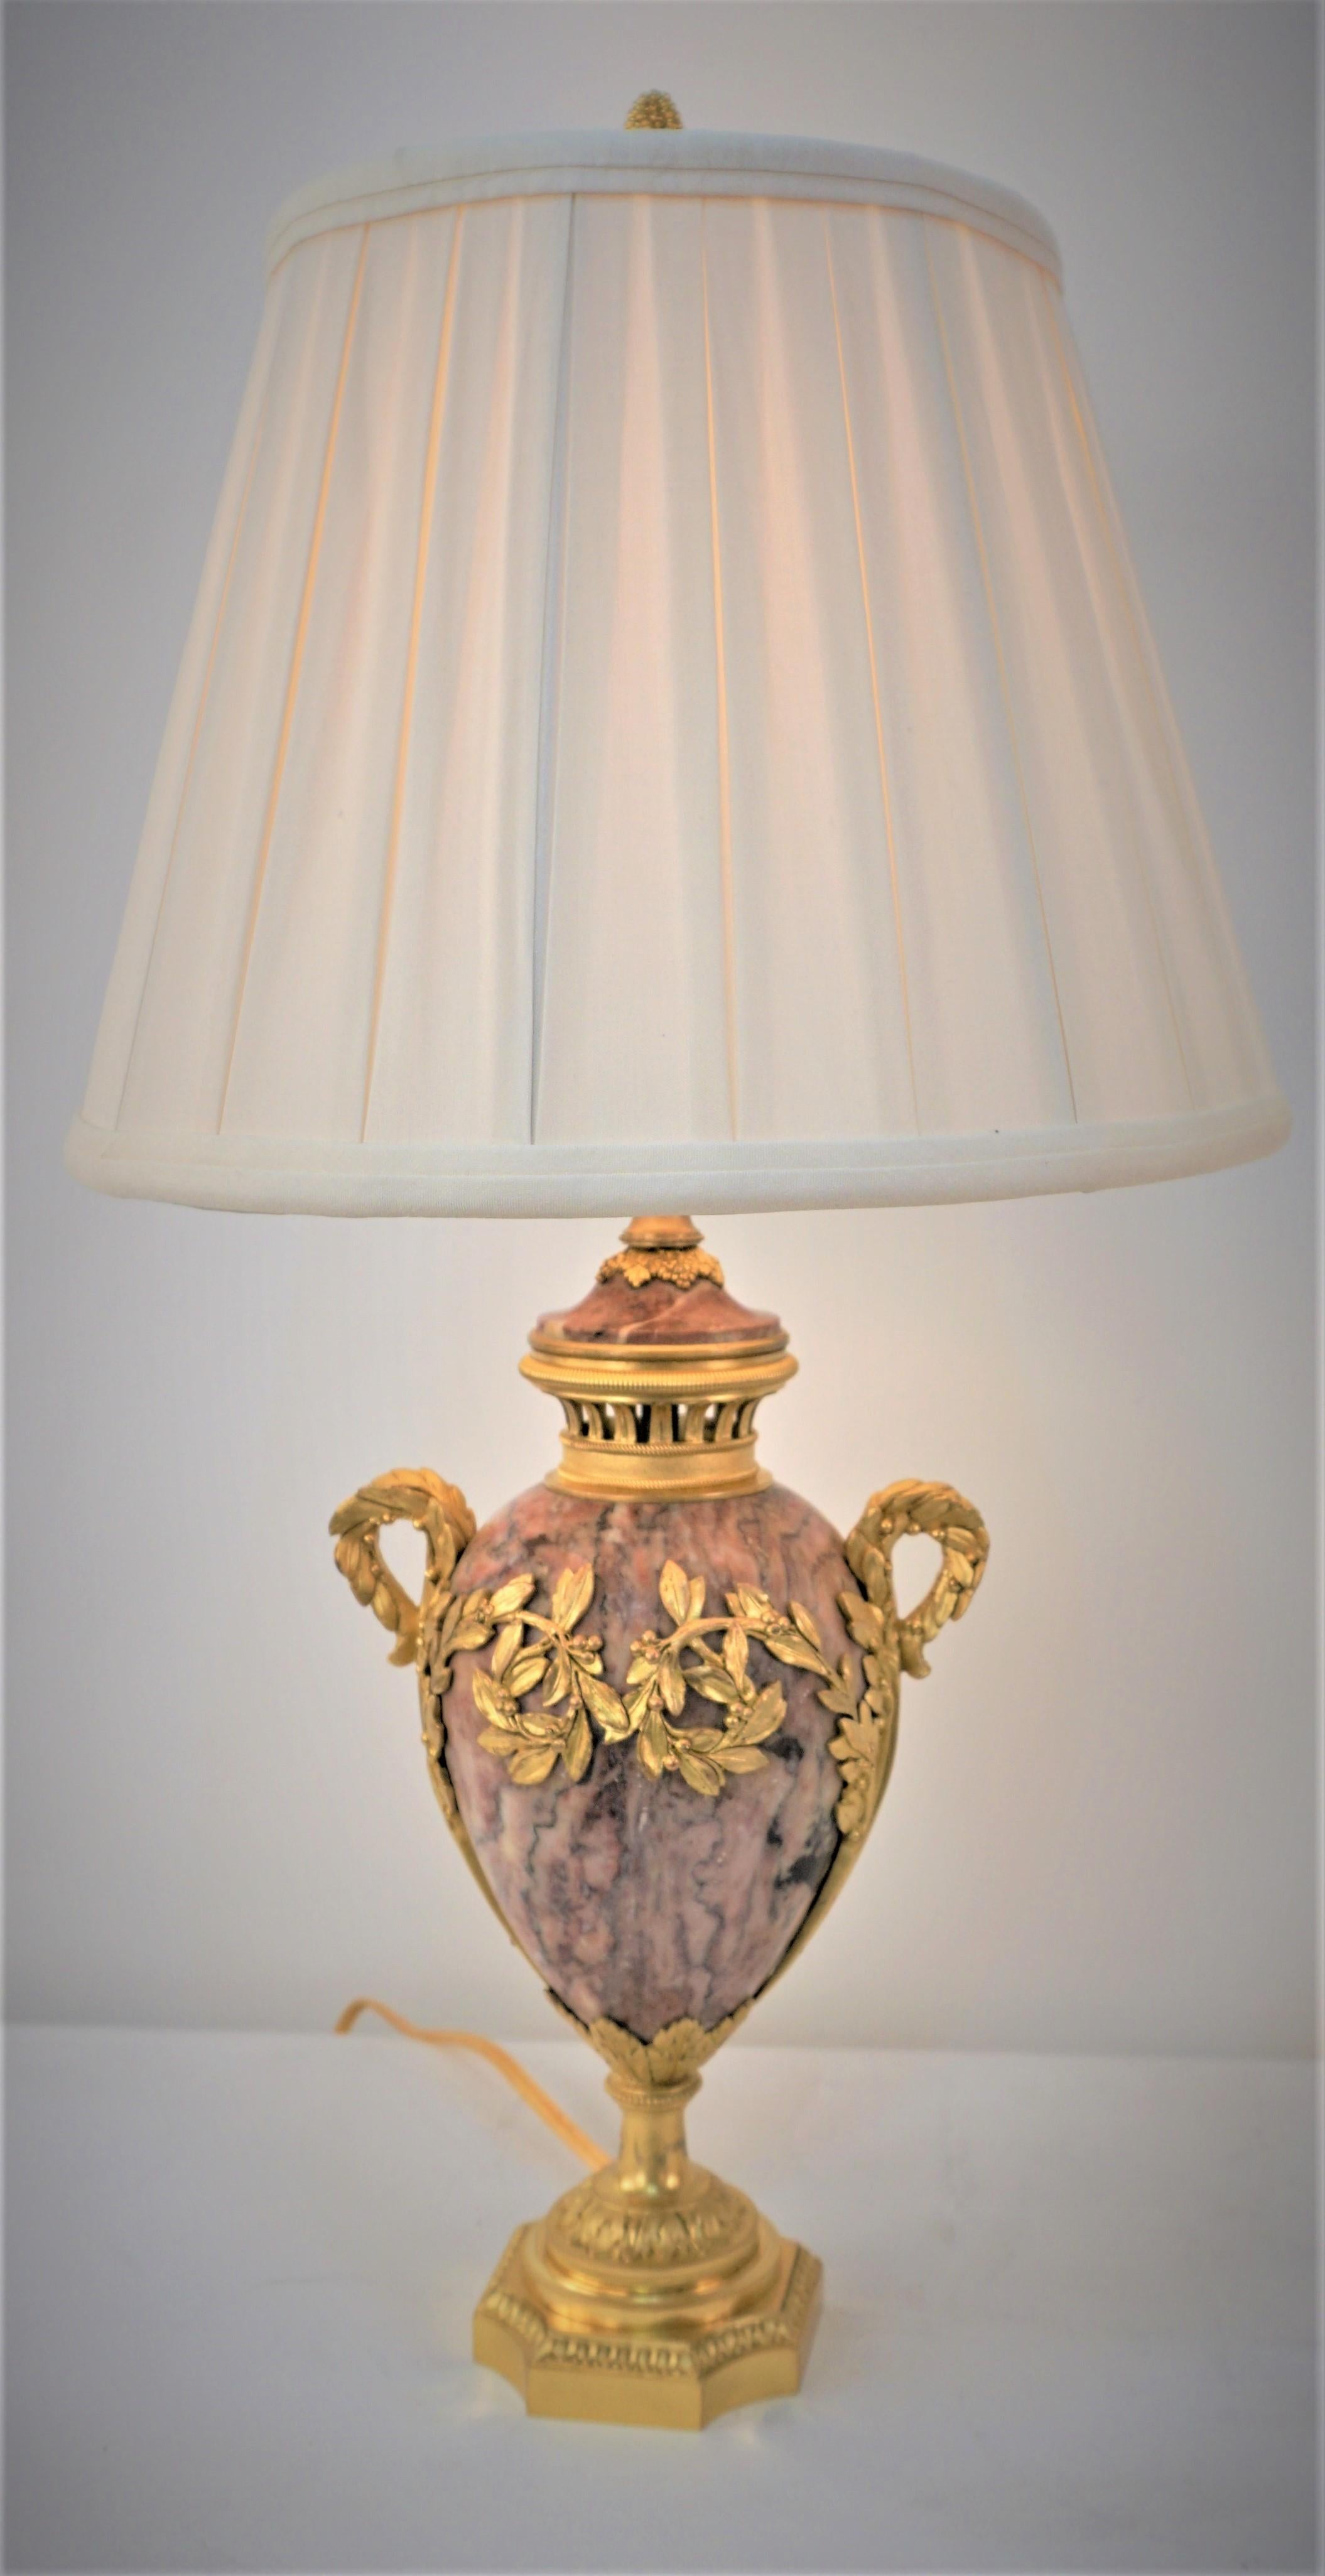 Pair of gilt bronze and textured pink marble urns that have been professionally electrified with 3way socked and fitted with box pleat silk lampshades.
Measurement: includes the lampshade.